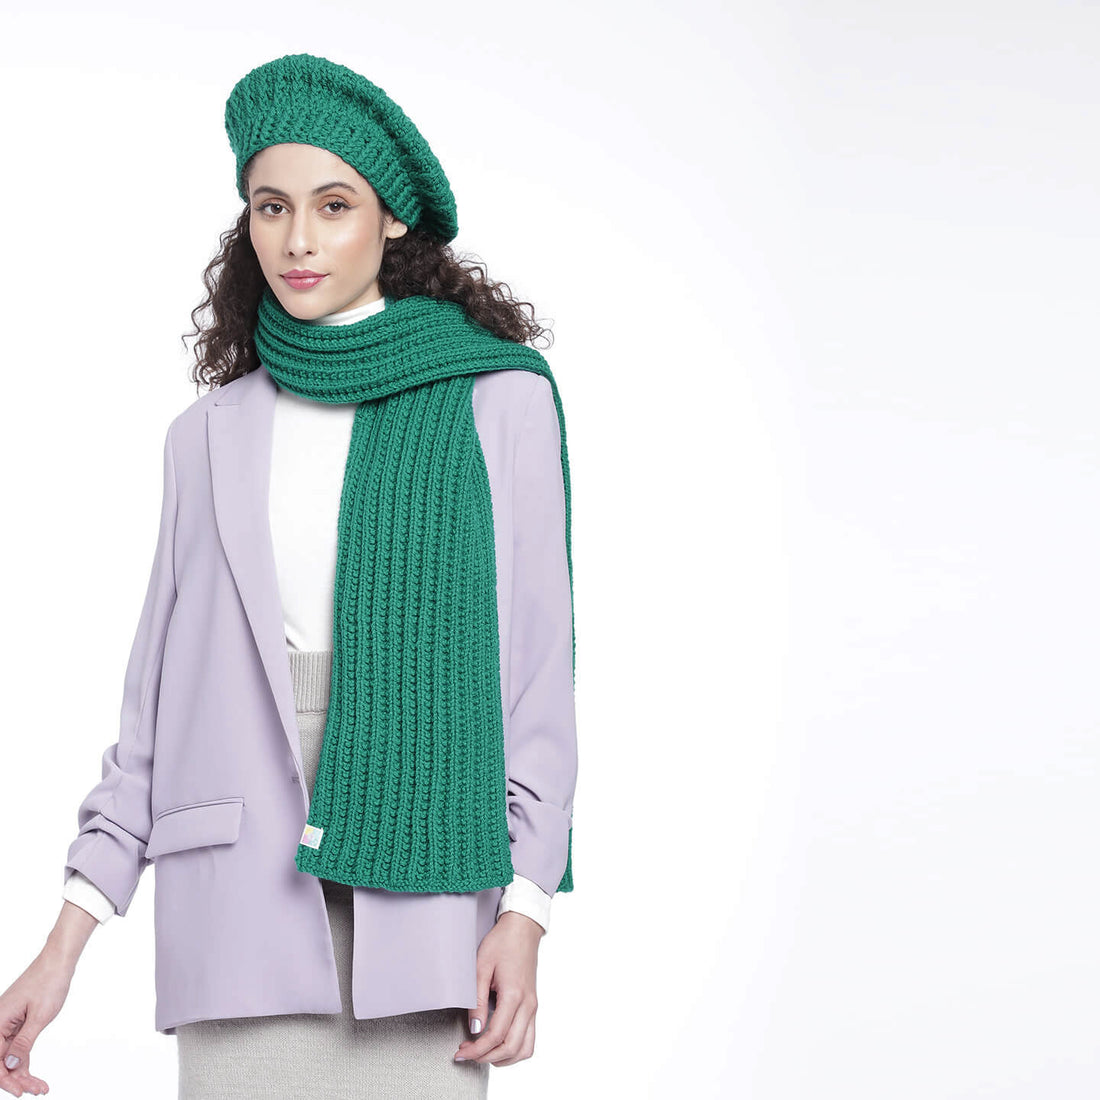 Beanie and Scarf Coordinating Set - 3187